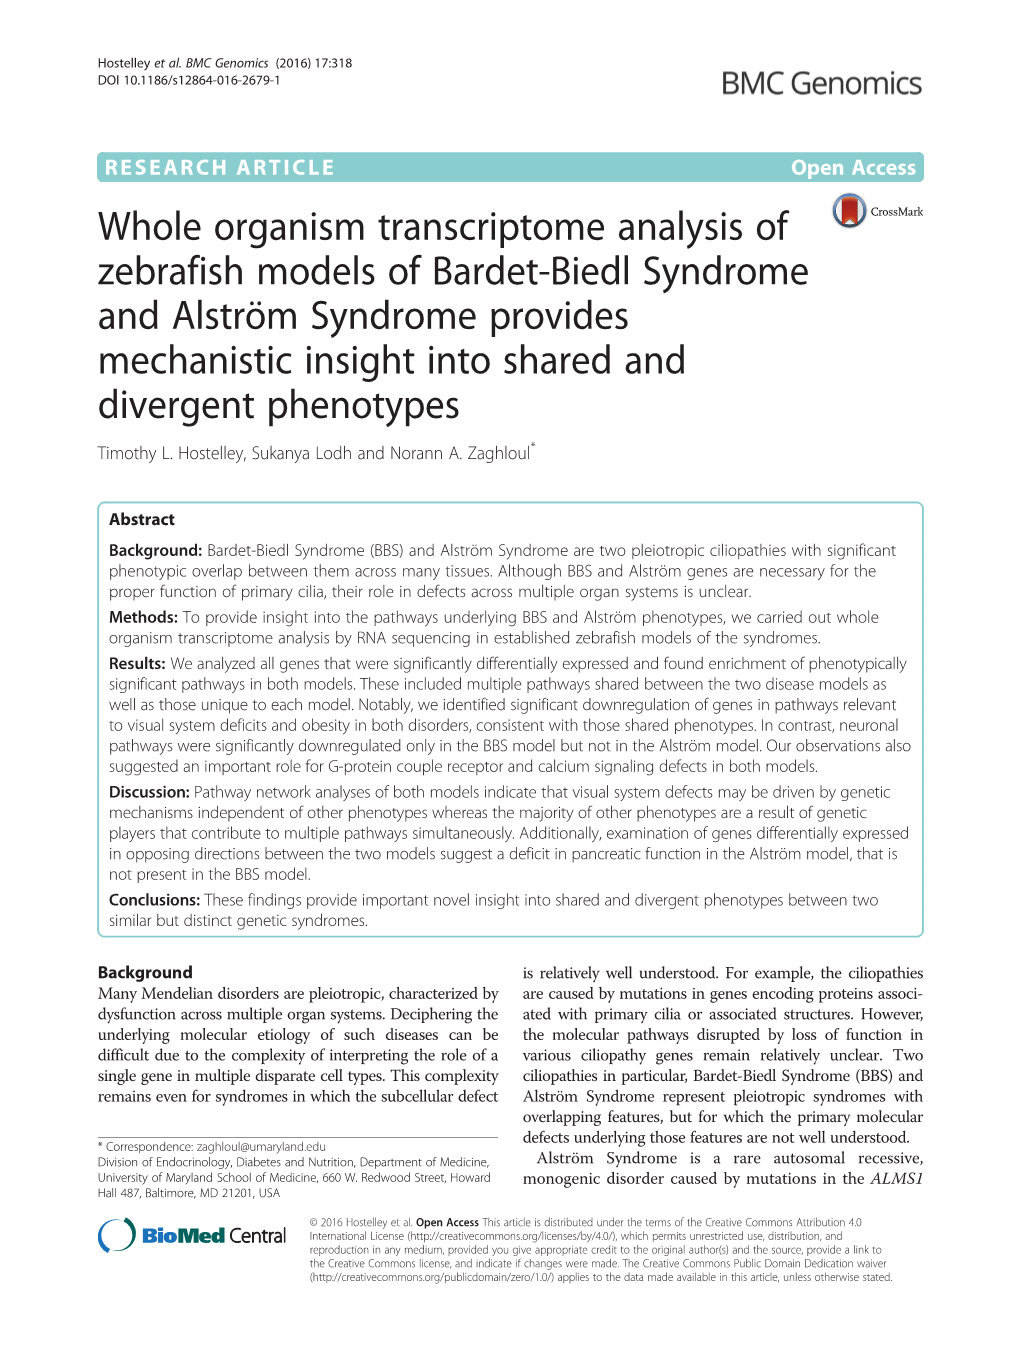 Whole Organism Transcriptome Analysis of Zebrafish Models of Bardet-Biedl Syndrome and Alström Syndrome Provides Mechanistic In